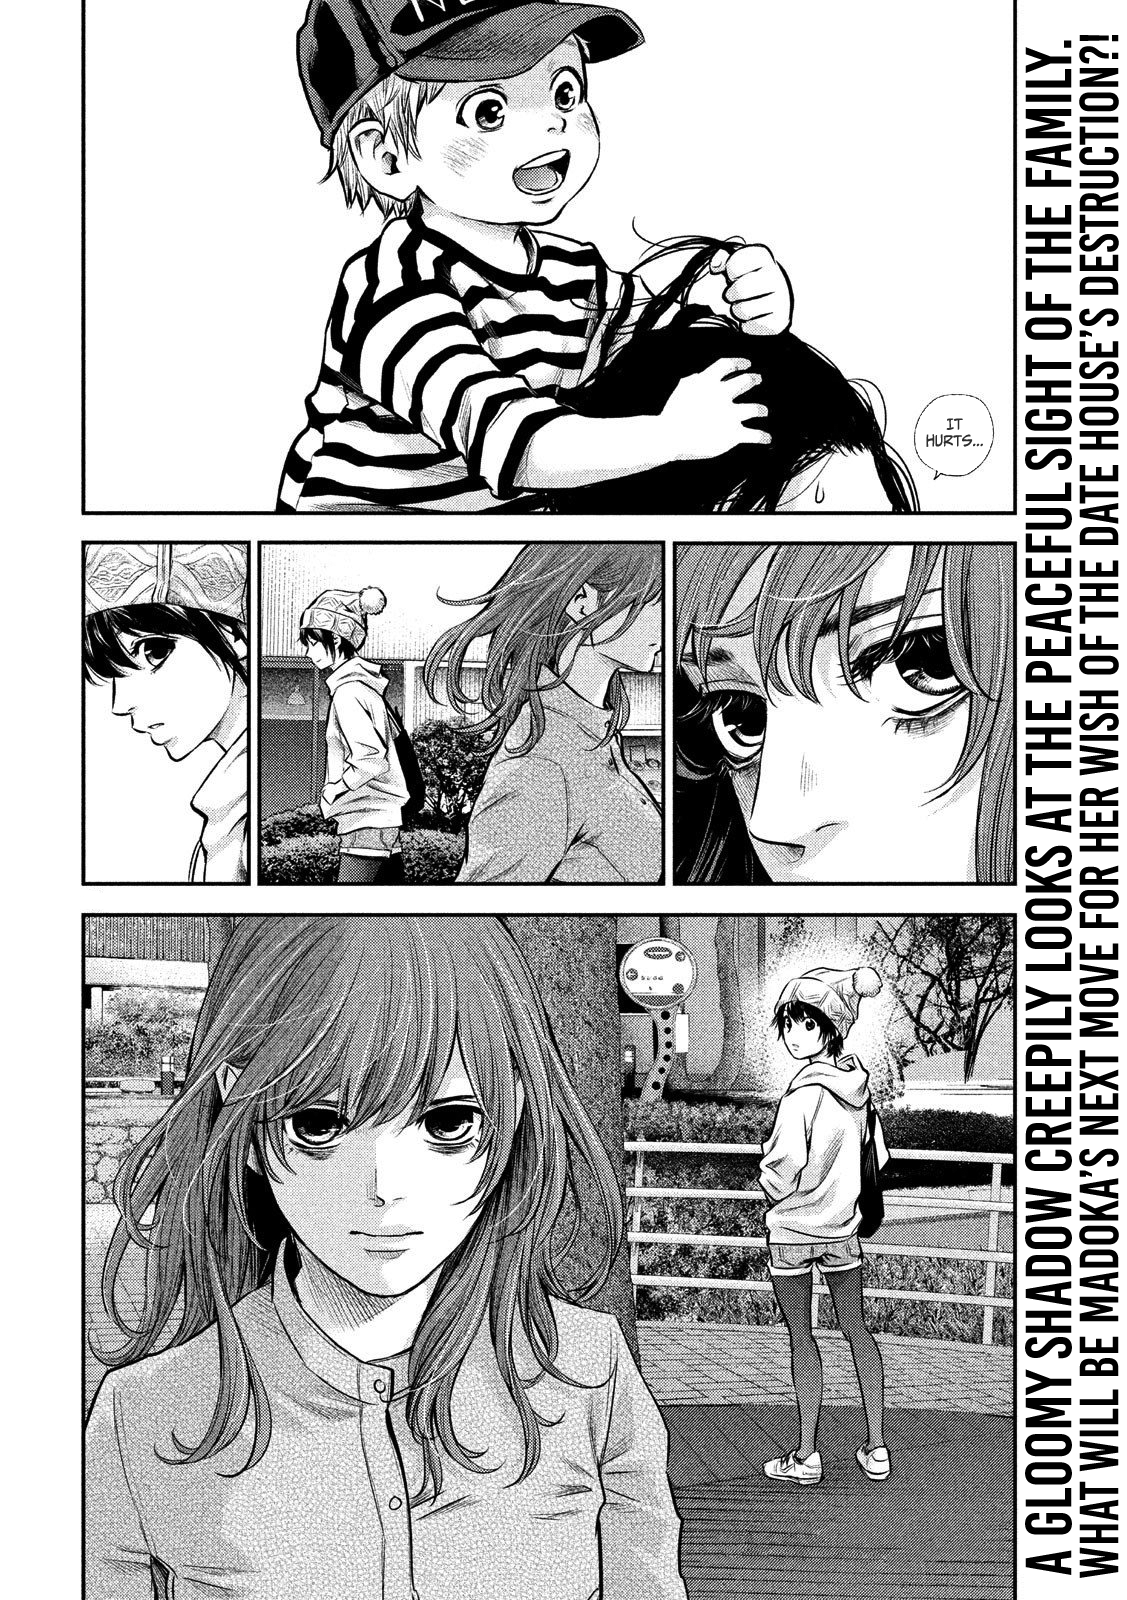 Hare-Kon. - Chapter 179 Page 19